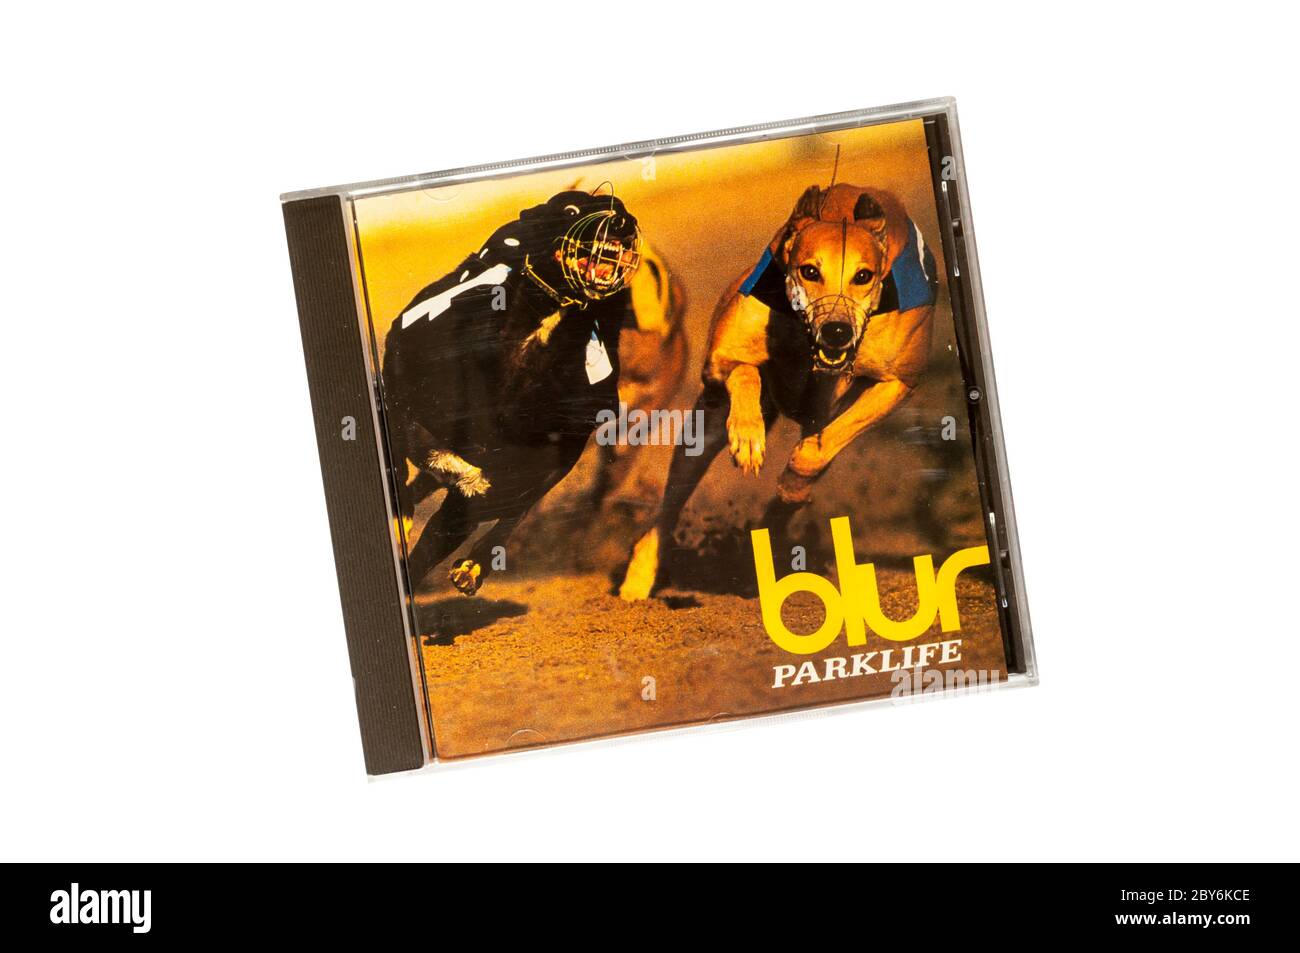 Parklife was the third studio album by Blur, the English rock band.  Released in 1994. Stock Photo